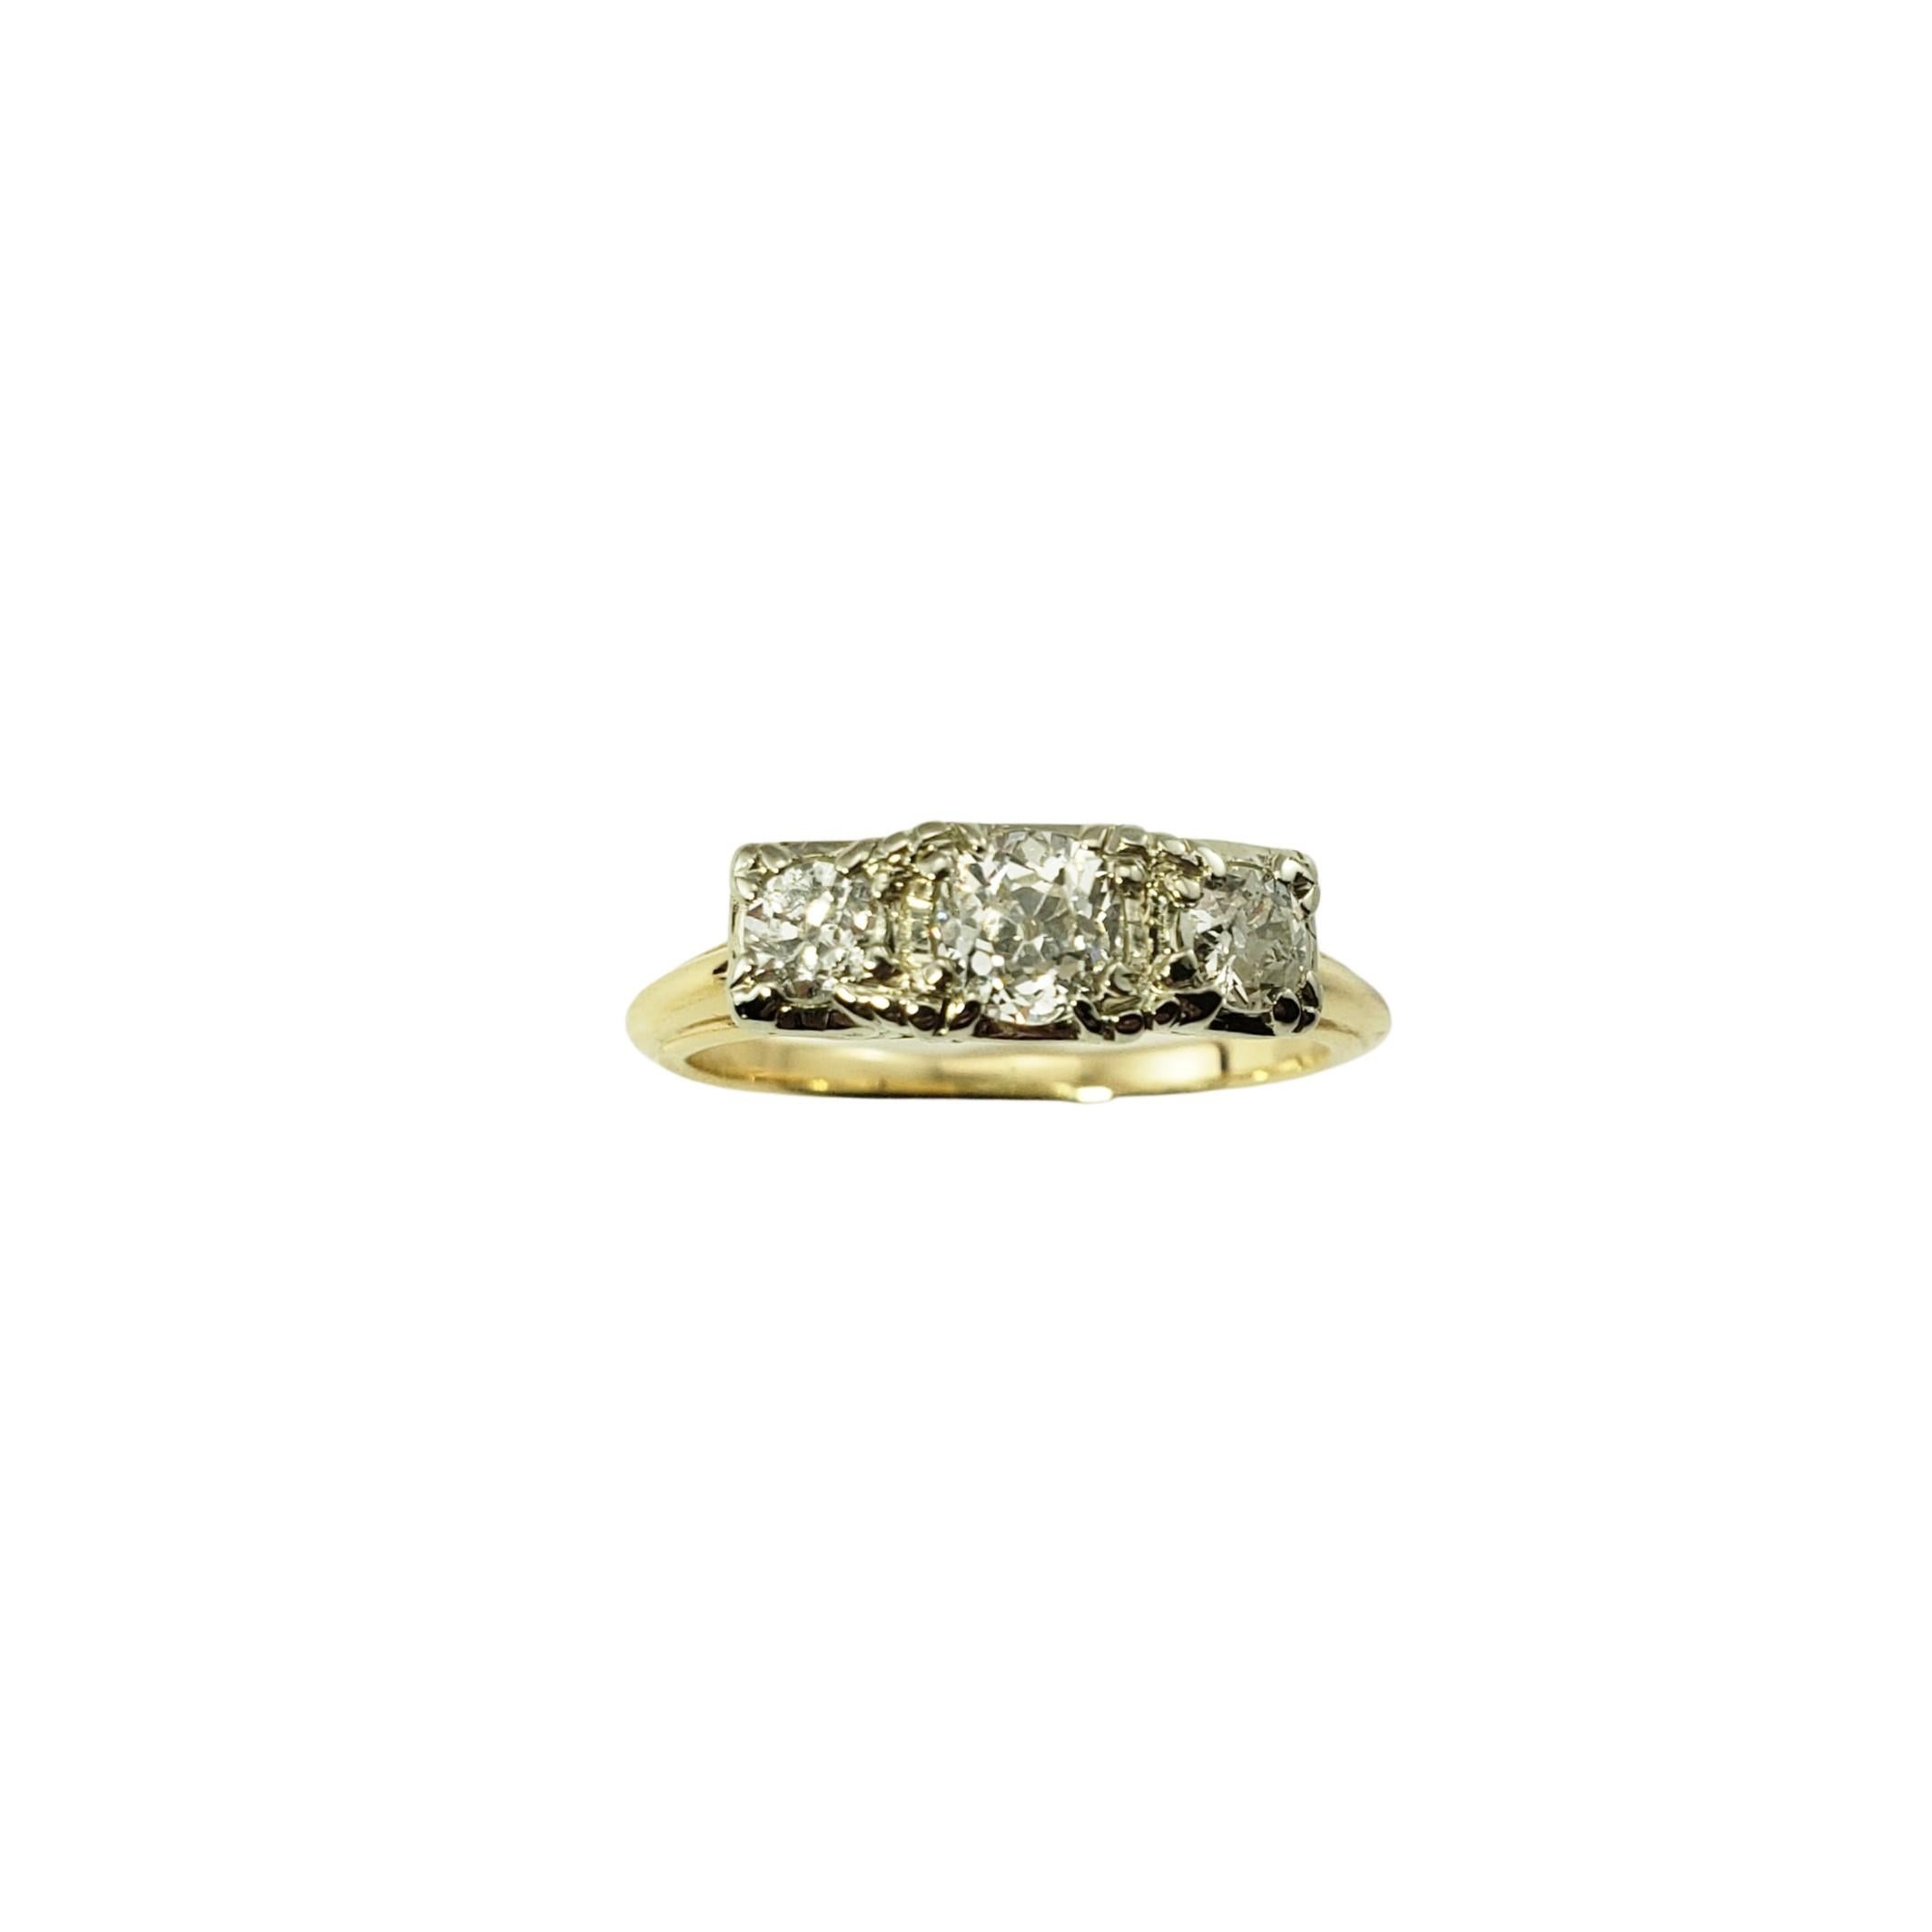 14 Karat Yellow Gold and Diamond Ring Size 5.5-

This sparkling ring features three round old mine cut diamonds set in 14K yellow gold.  Width 5 mm.  Shank:  1 mm.

Approximate total diamond weight:  .60 ct.

Diamond color: G

Diamond clarity: